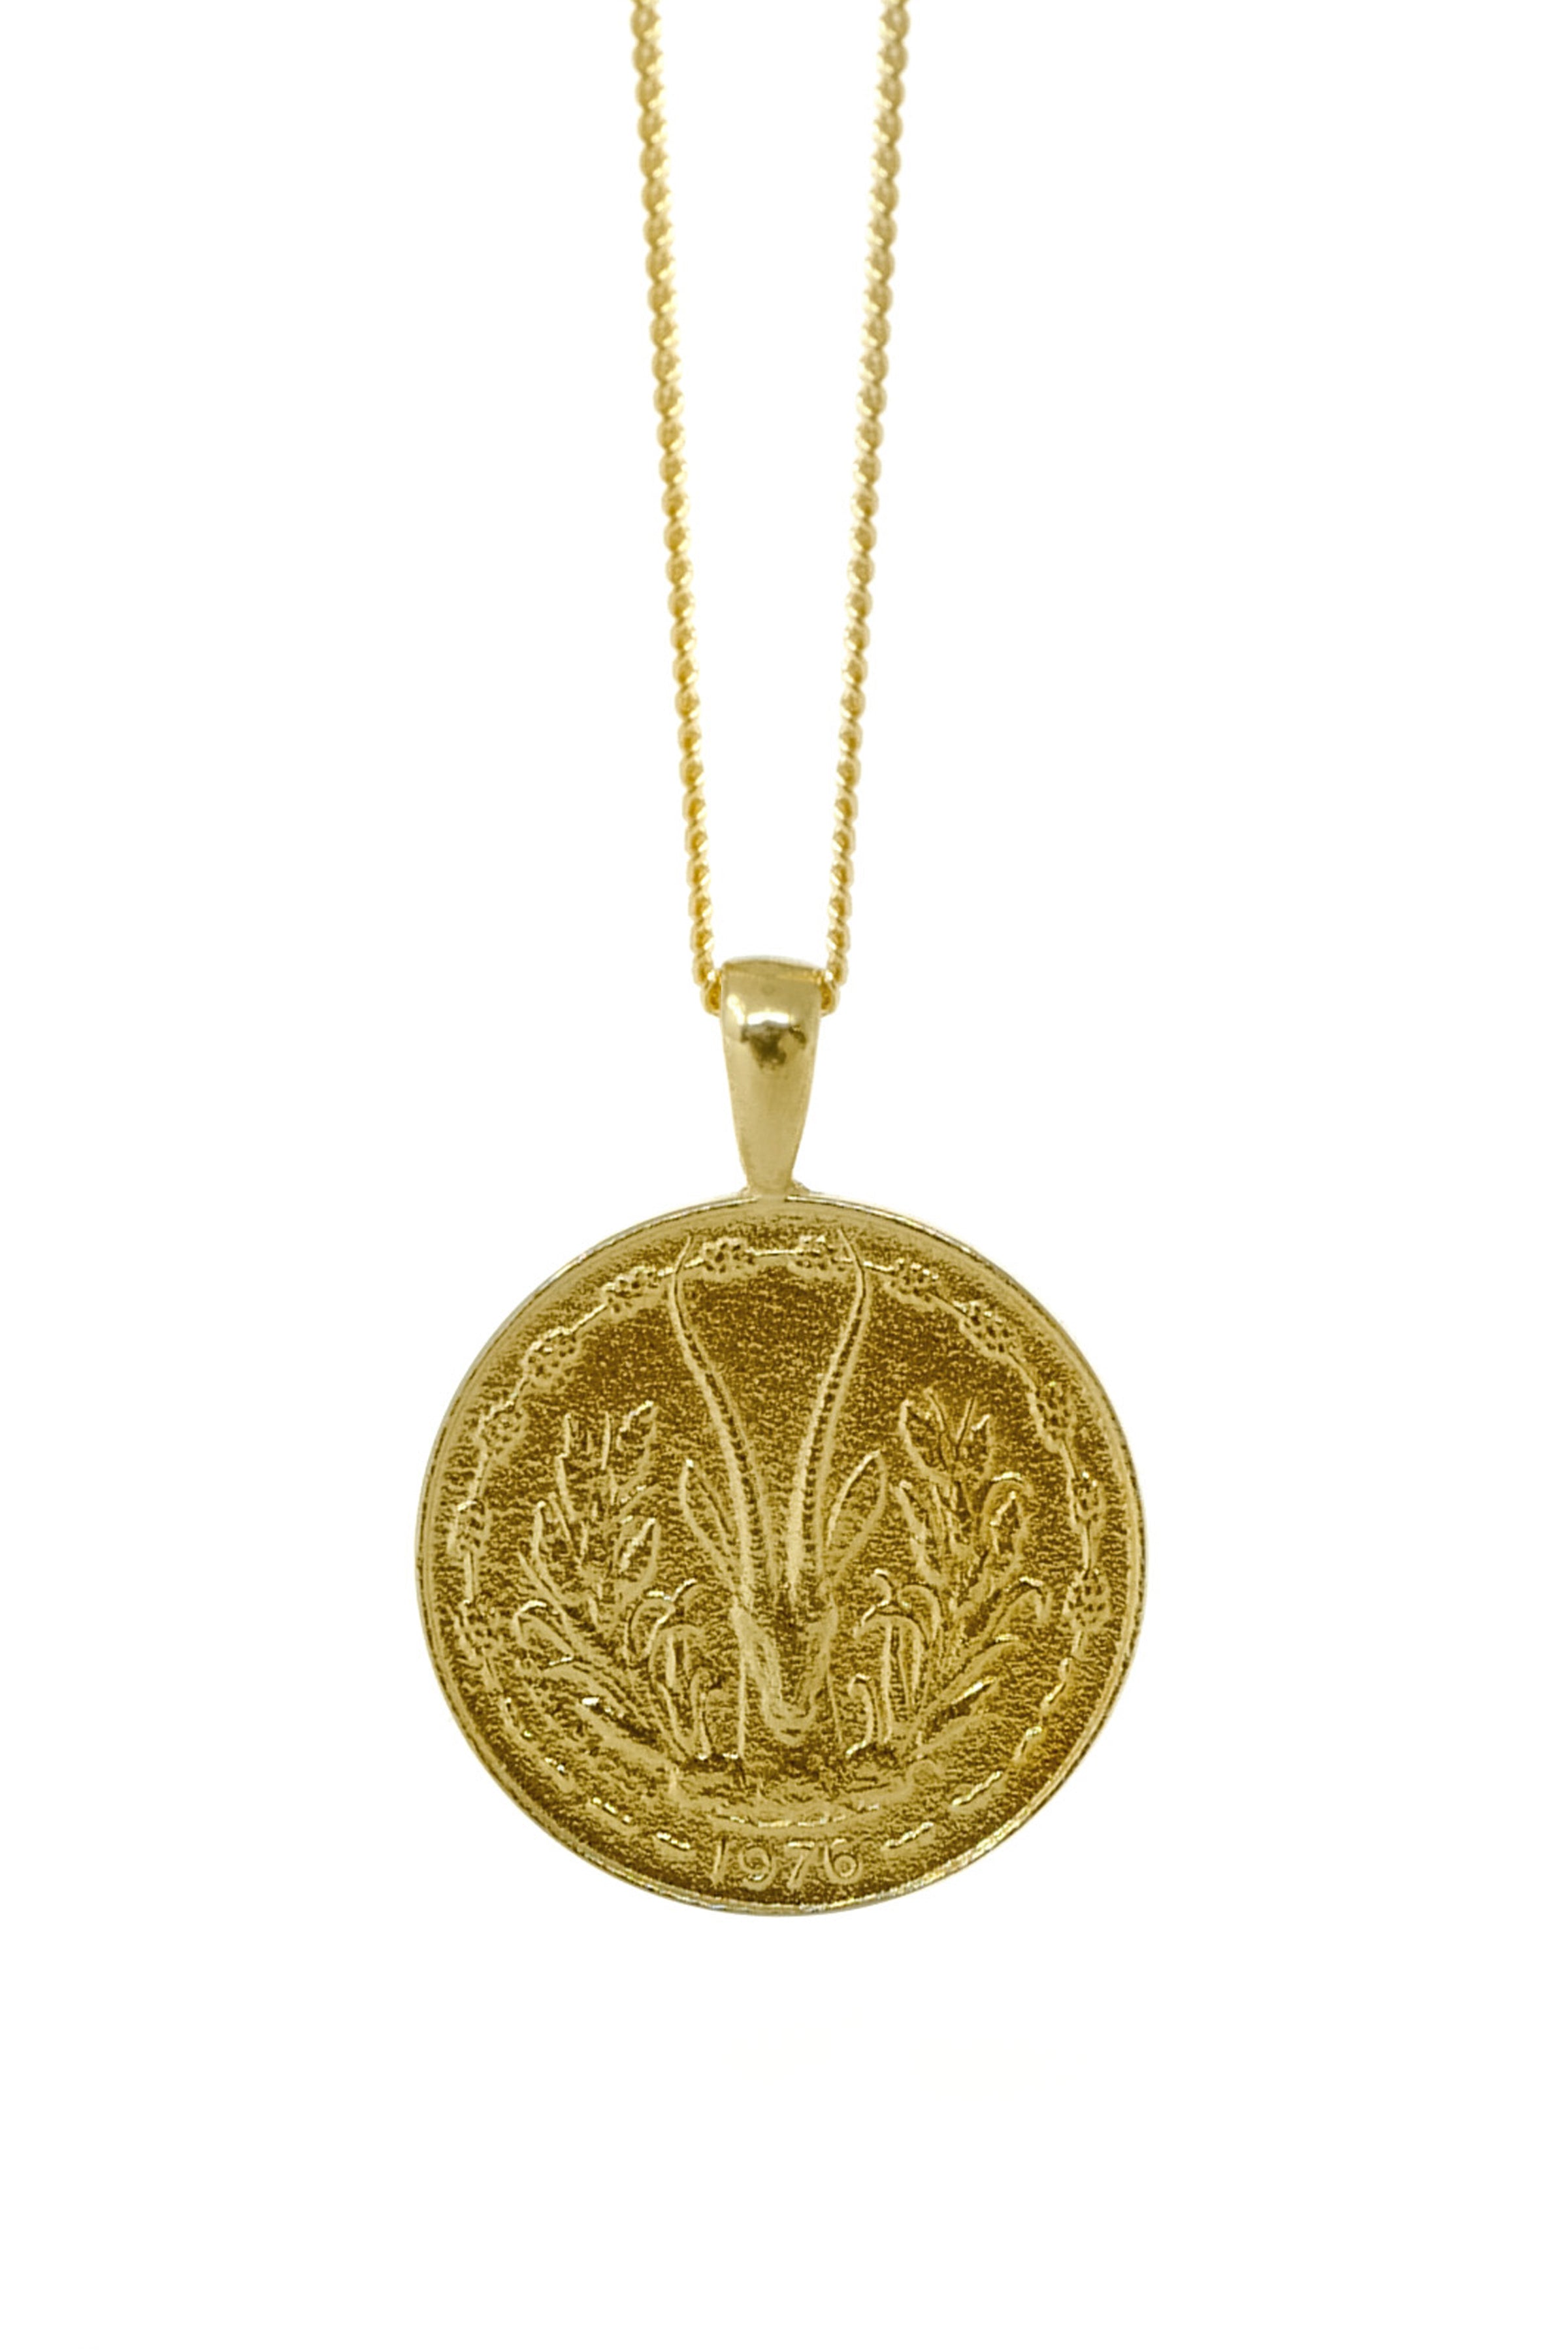 Giani Bernini Two-Tone Coin Pendant Necklace in Sterling Silver & 18k Gold-Plate,  16